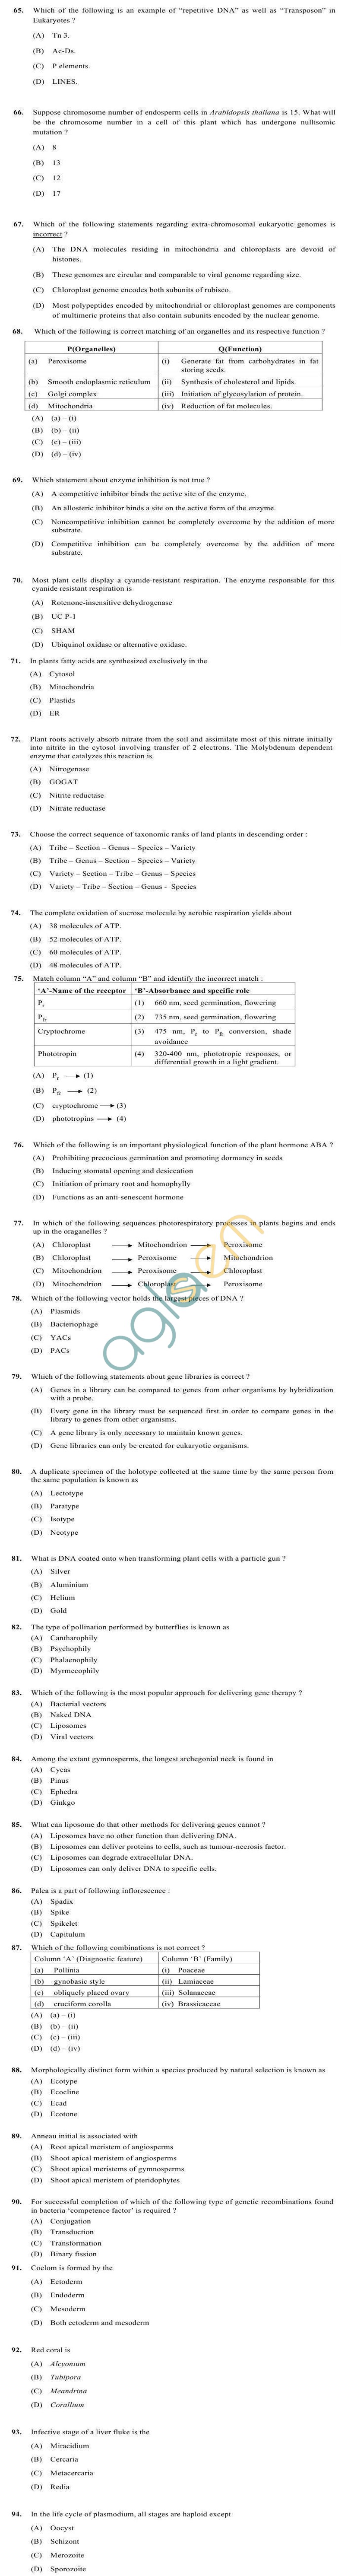 OJEE 2013 Question Paper with Answers LE BSC PCB